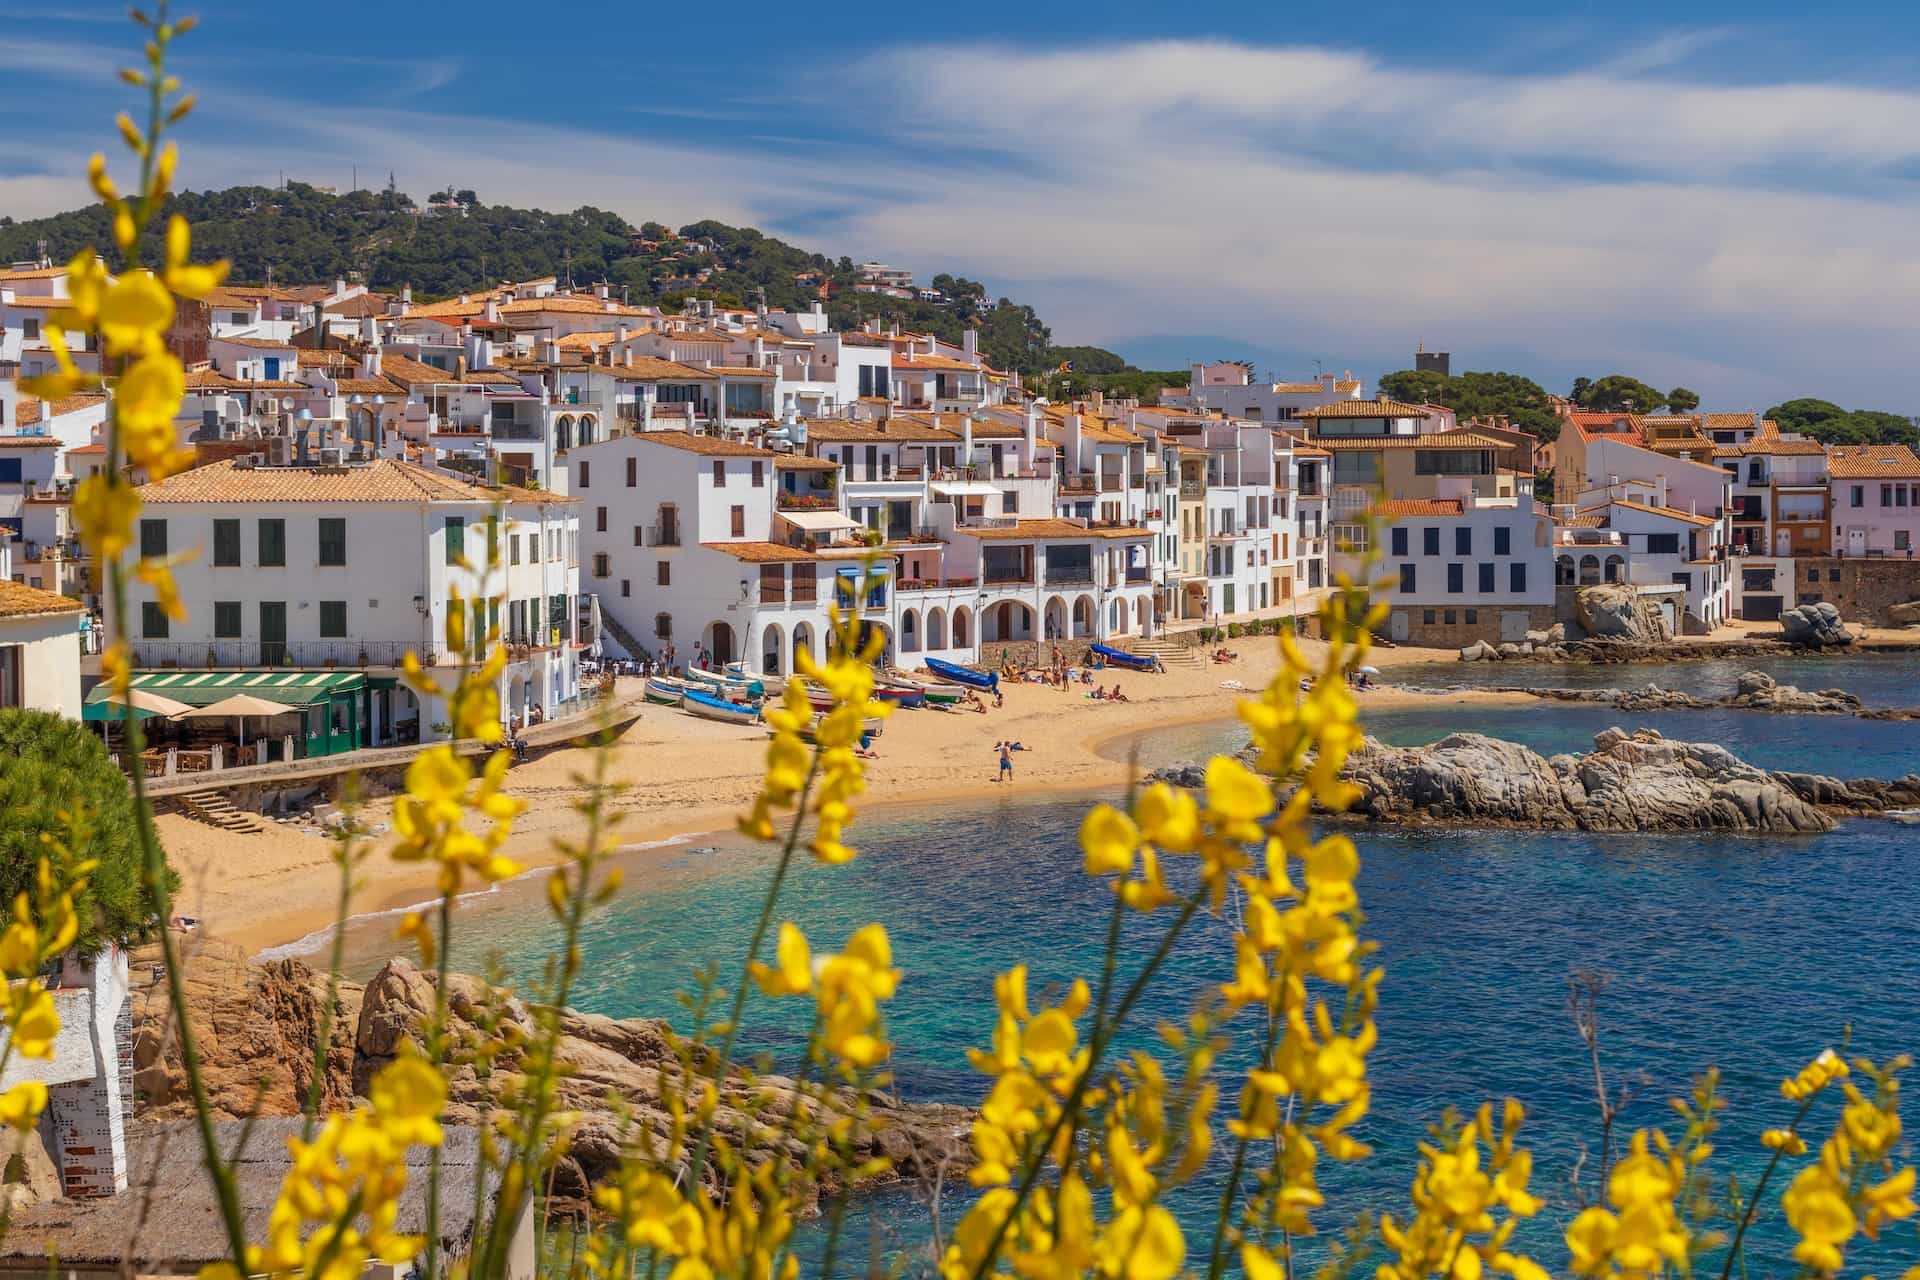 White houses on the coast at Palafrugell, Spain.